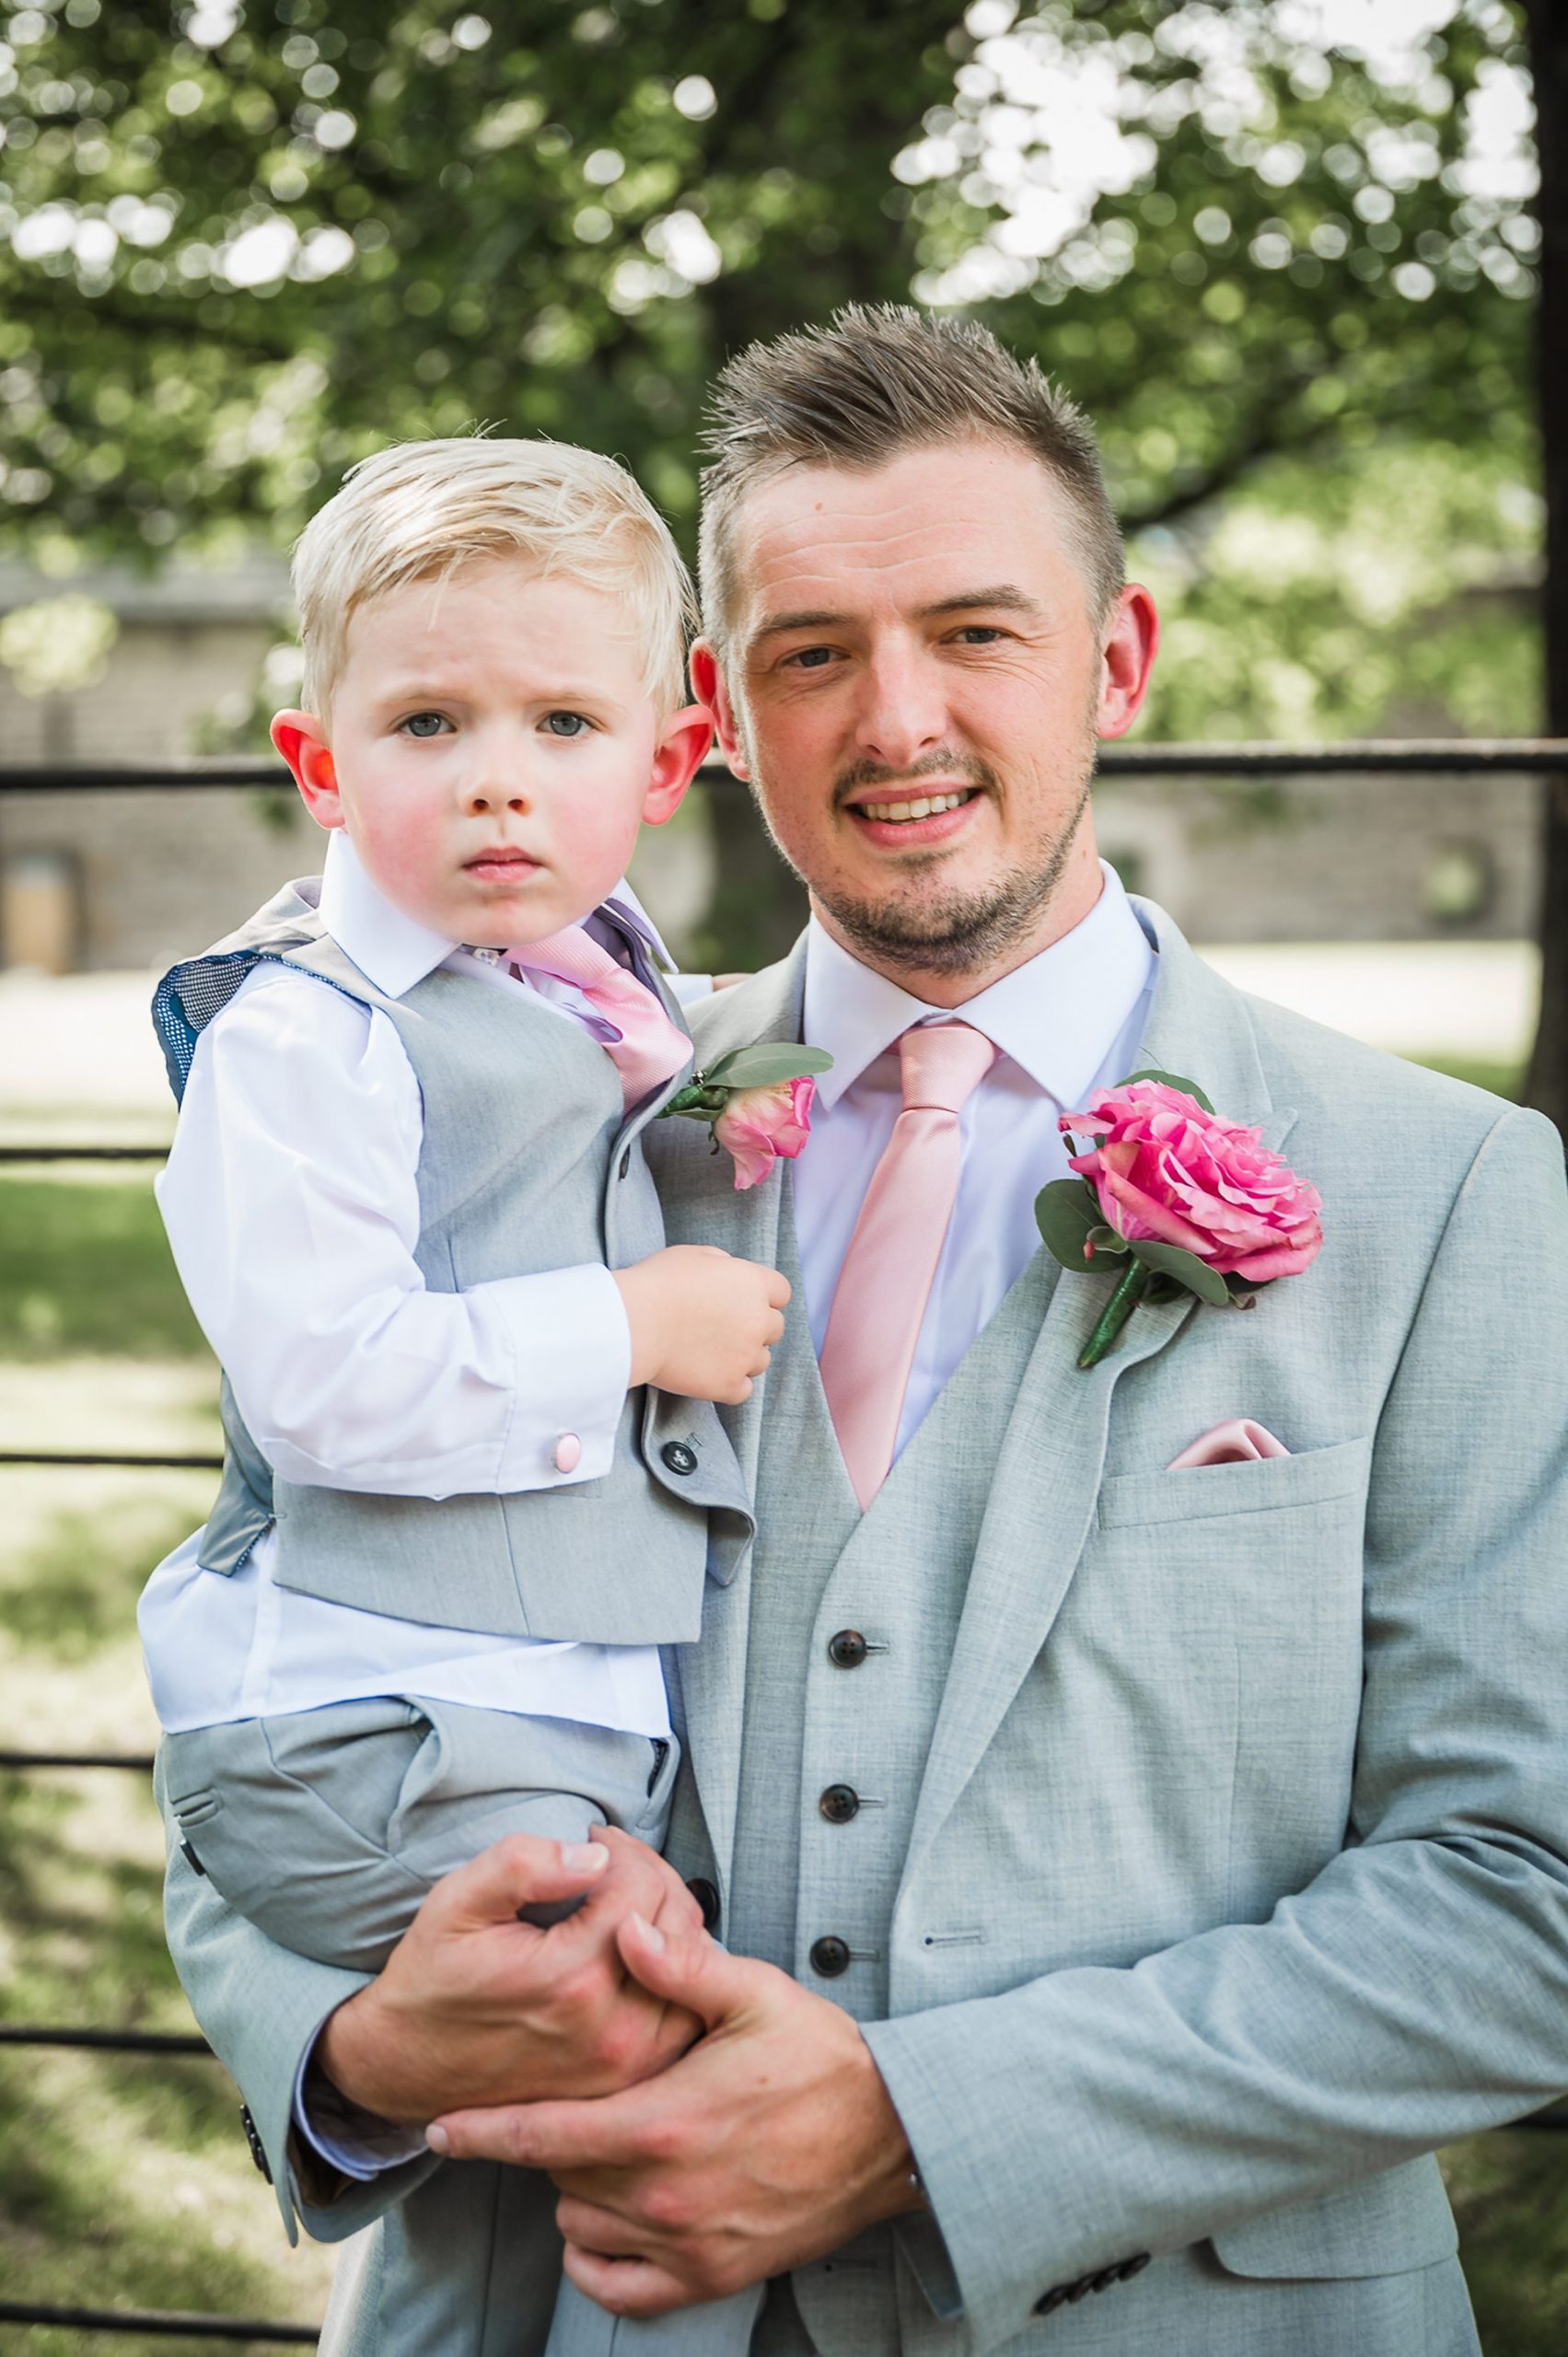 picture of the groom with his young son